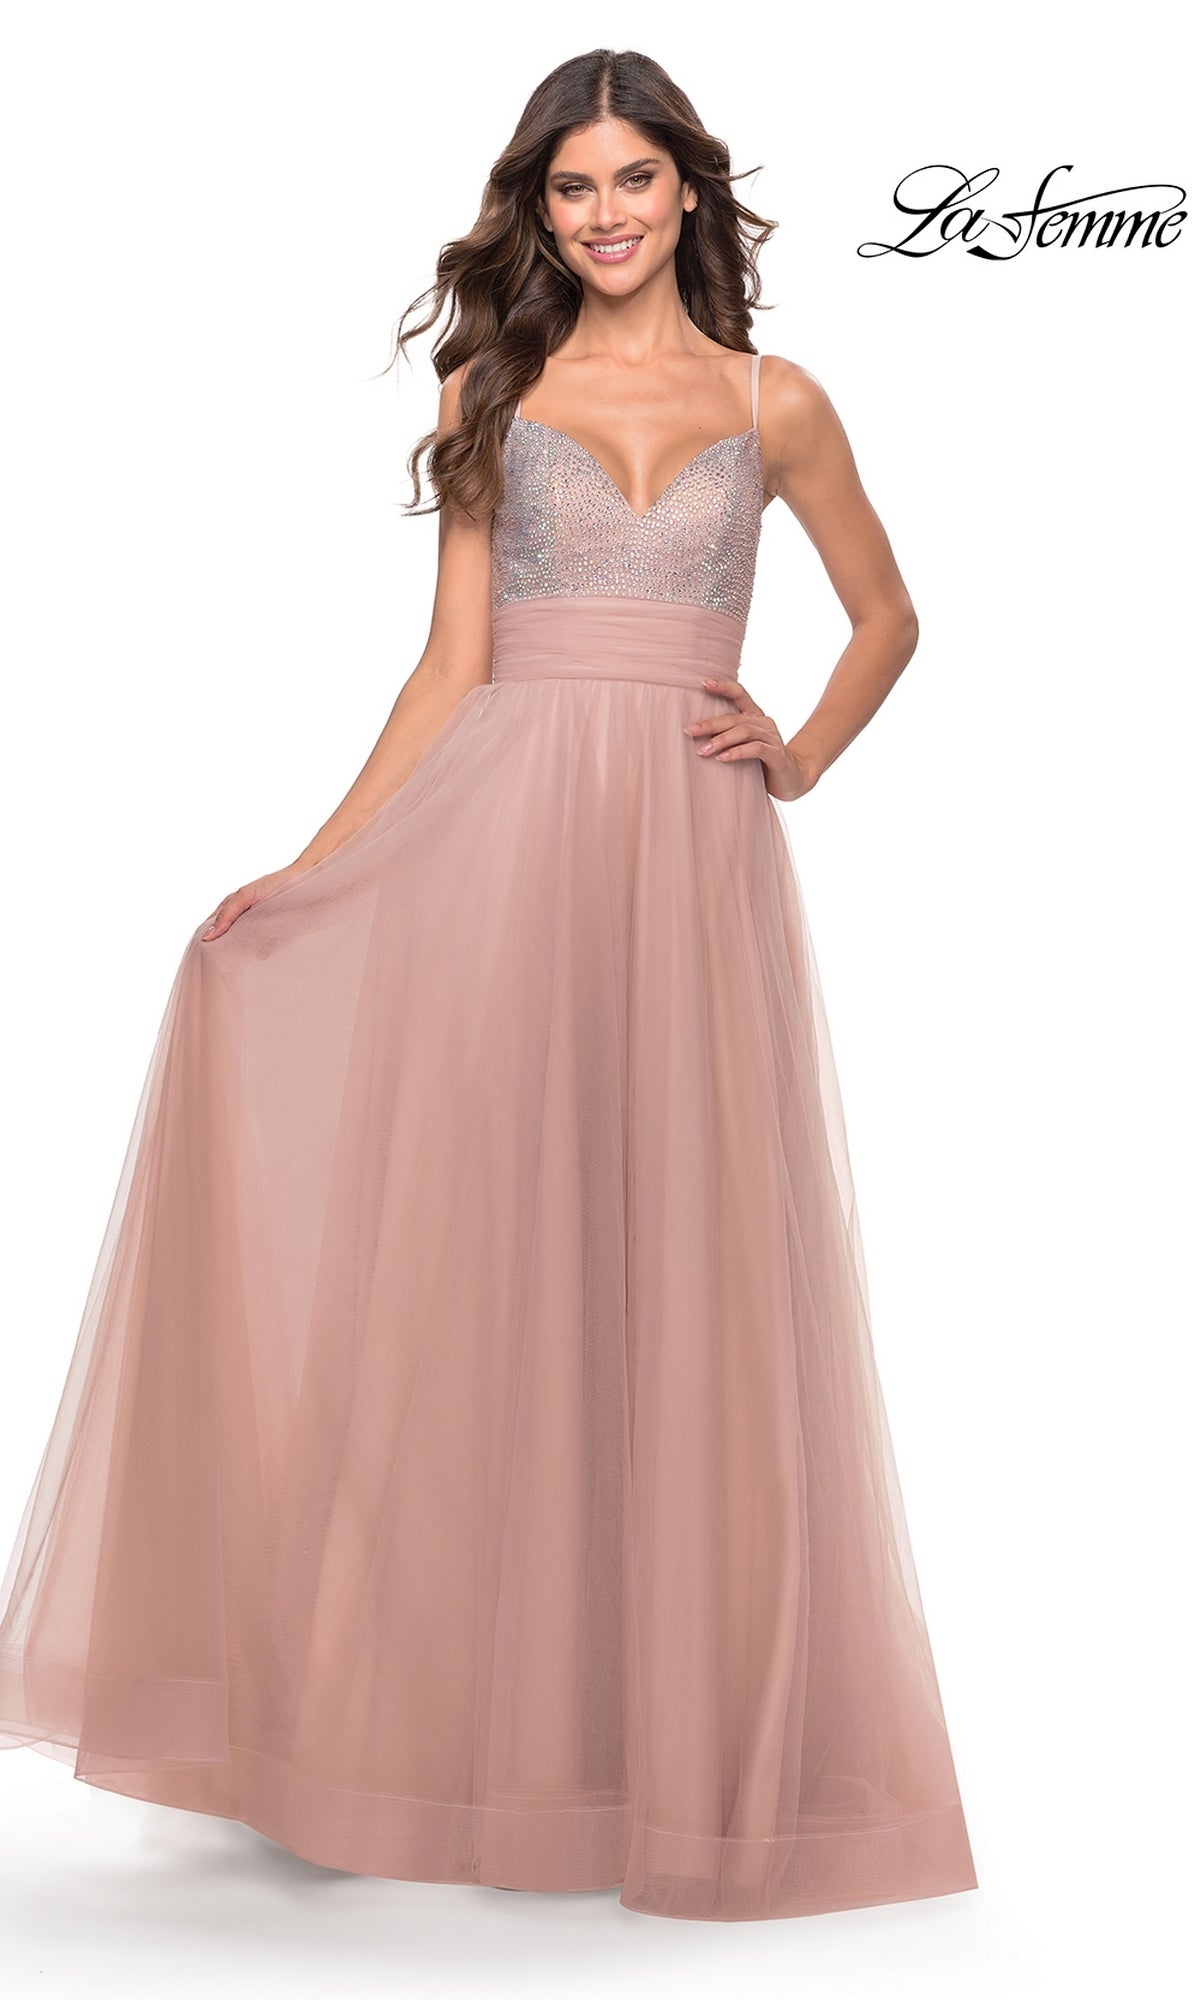 Beaded-Bodice Tulle Prom Ball Gown 31238